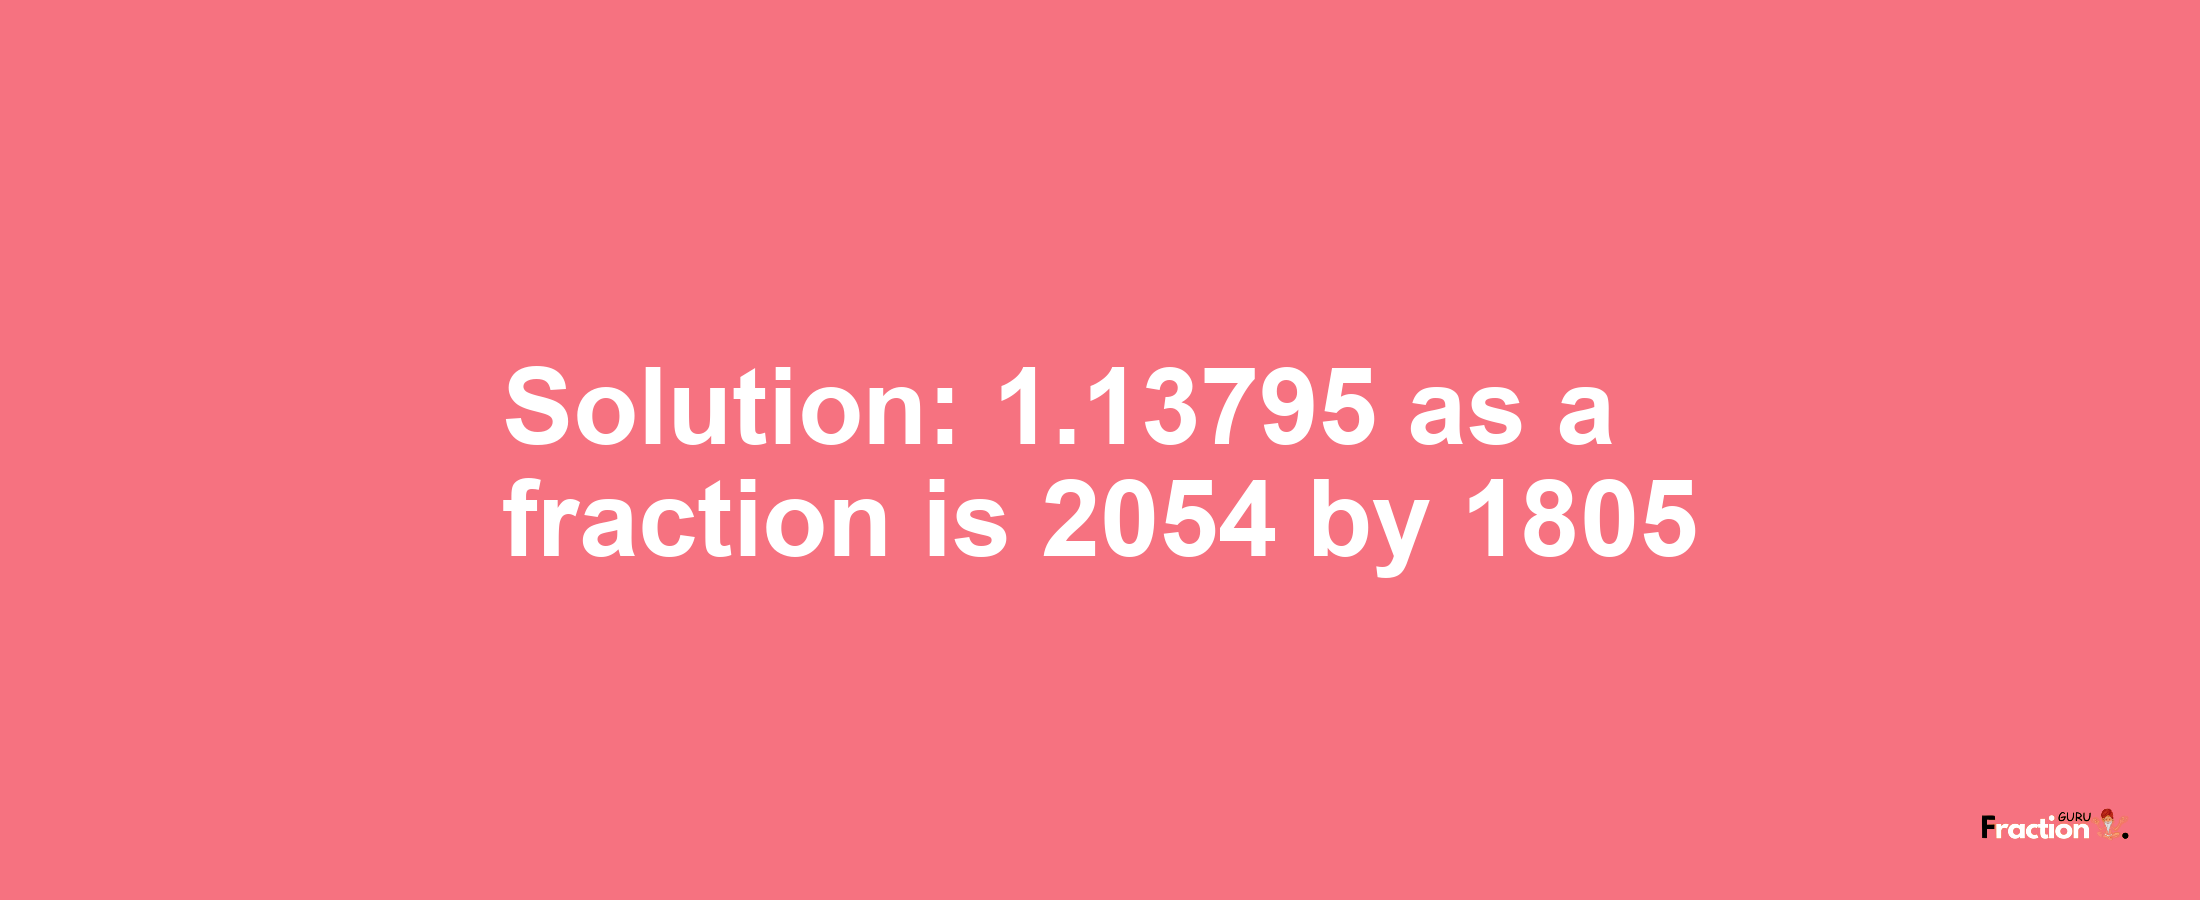 Solution:1.13795 as a fraction is 2054/1805